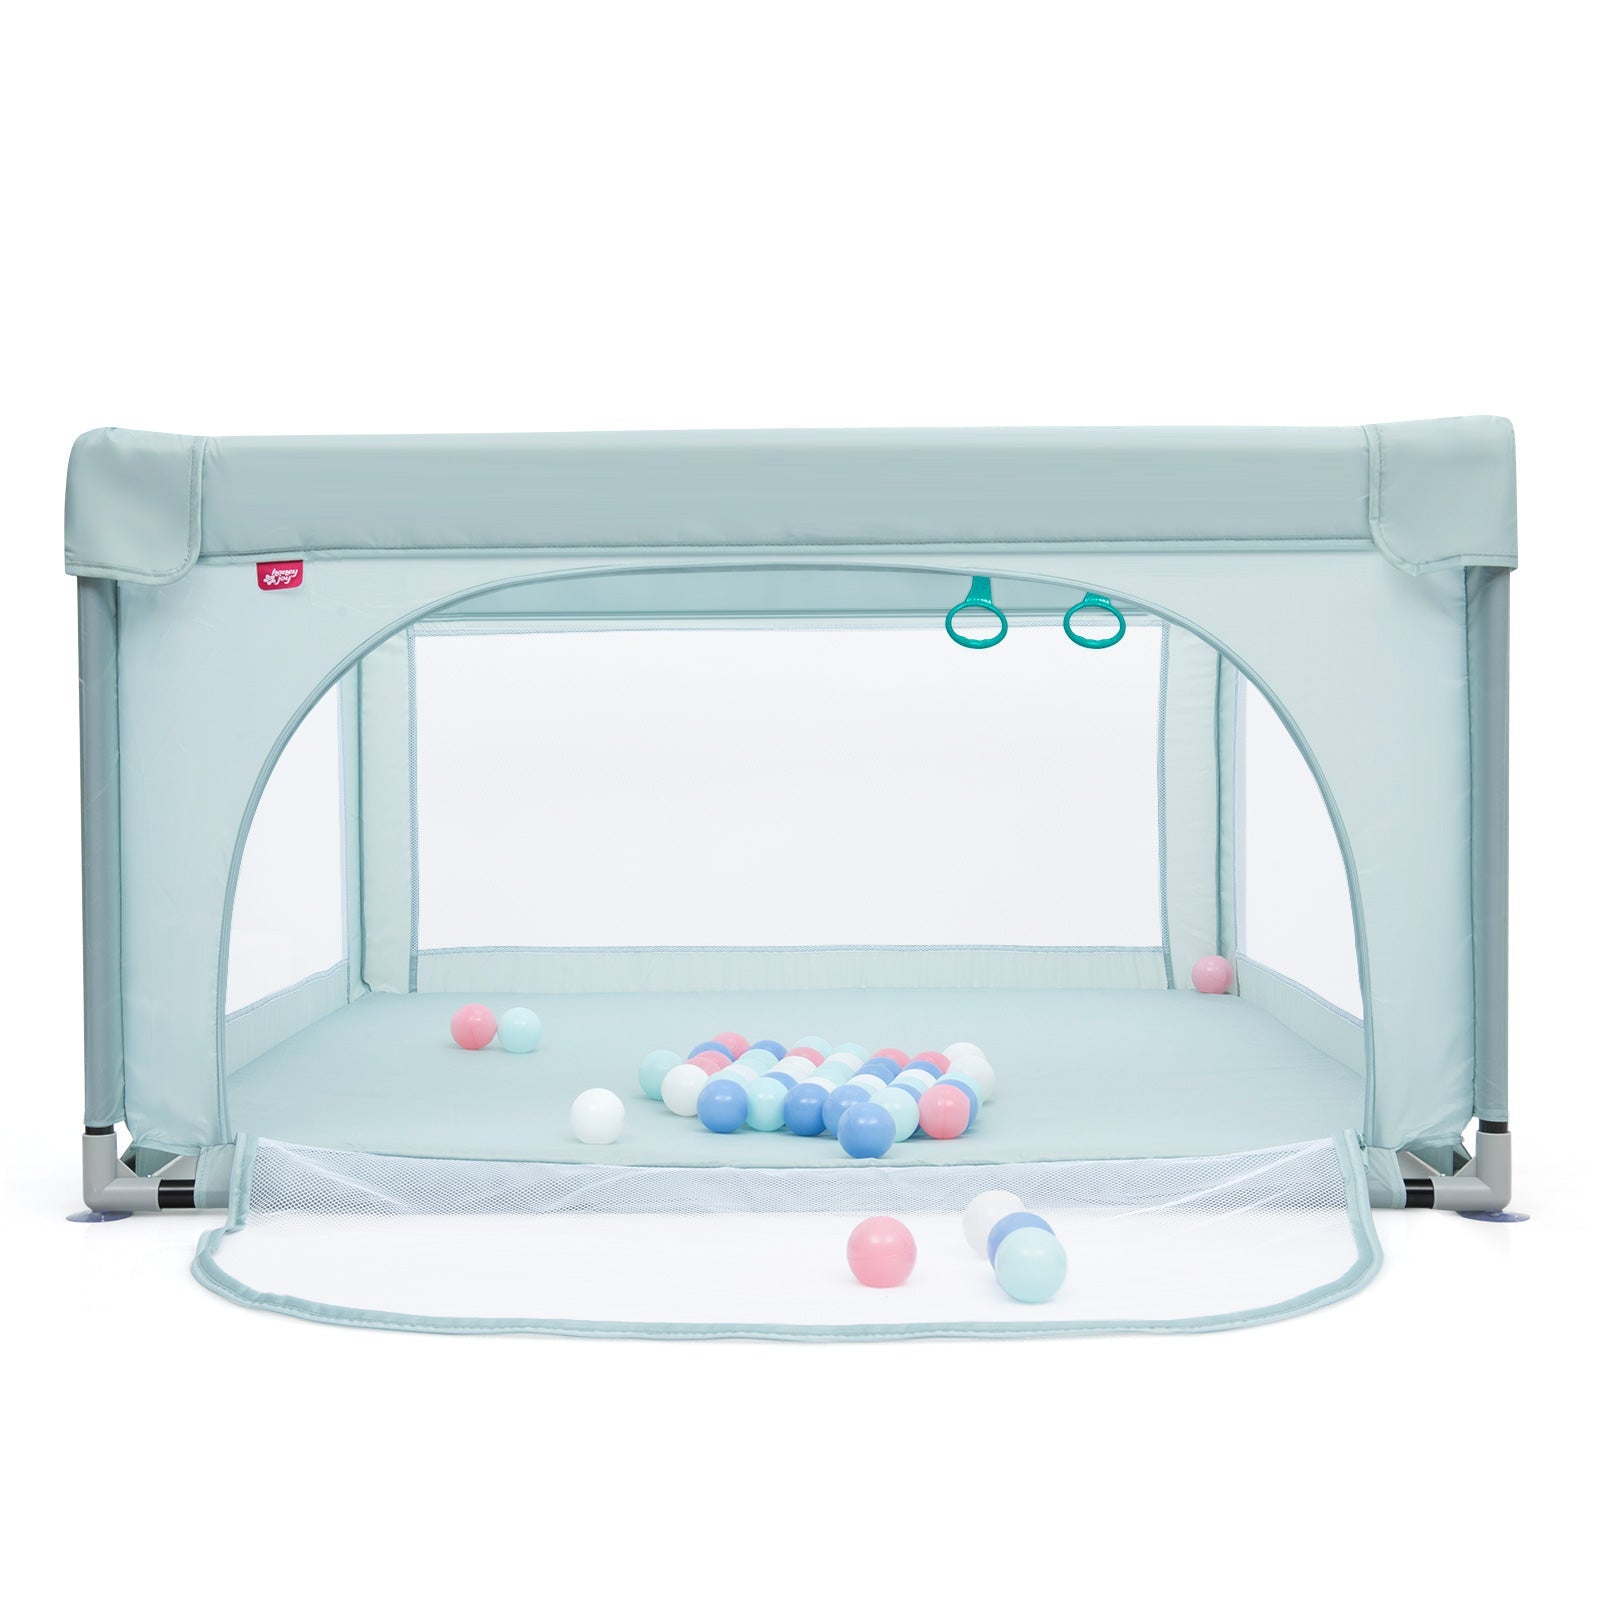 Baby Playpen Safety Activity Fence in Blue: Includes 50 Ocean Balls for Toddlers